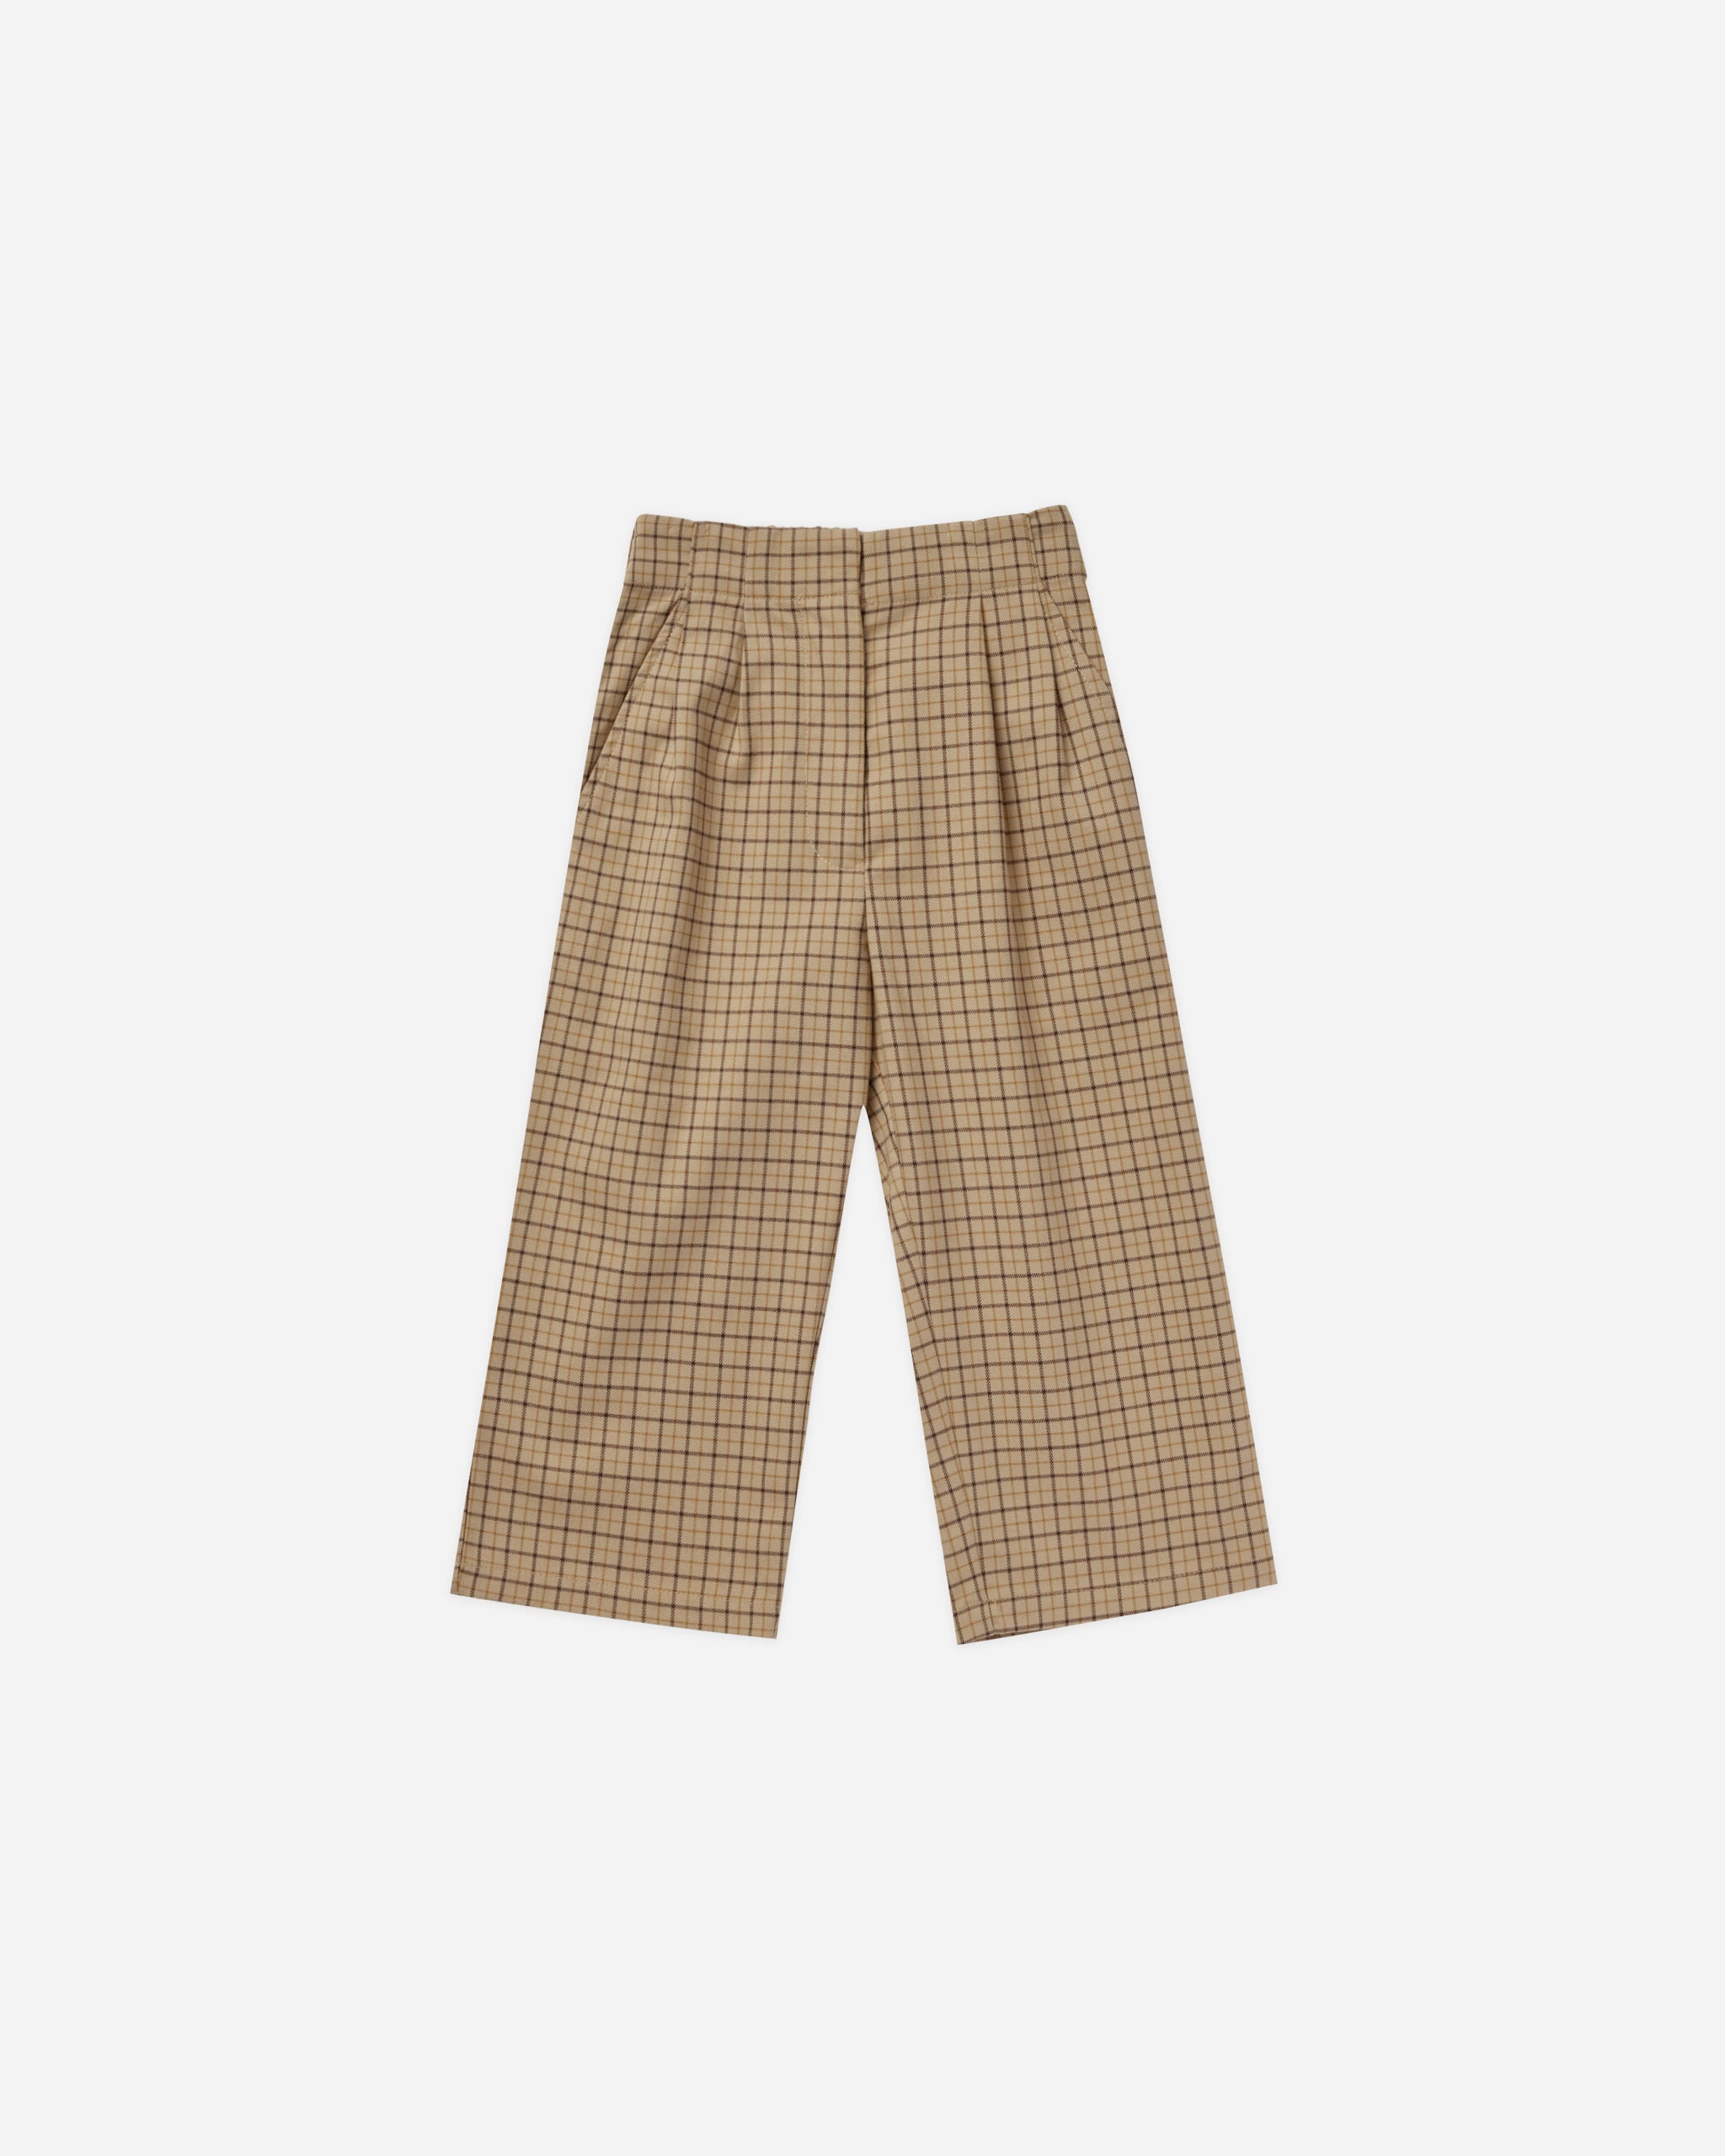 Brooklyn Trouser || Autumn Plaid - Rylee + Cru | Kids Clothes | Trendy Baby Clothes | Modern Infant Outfits |